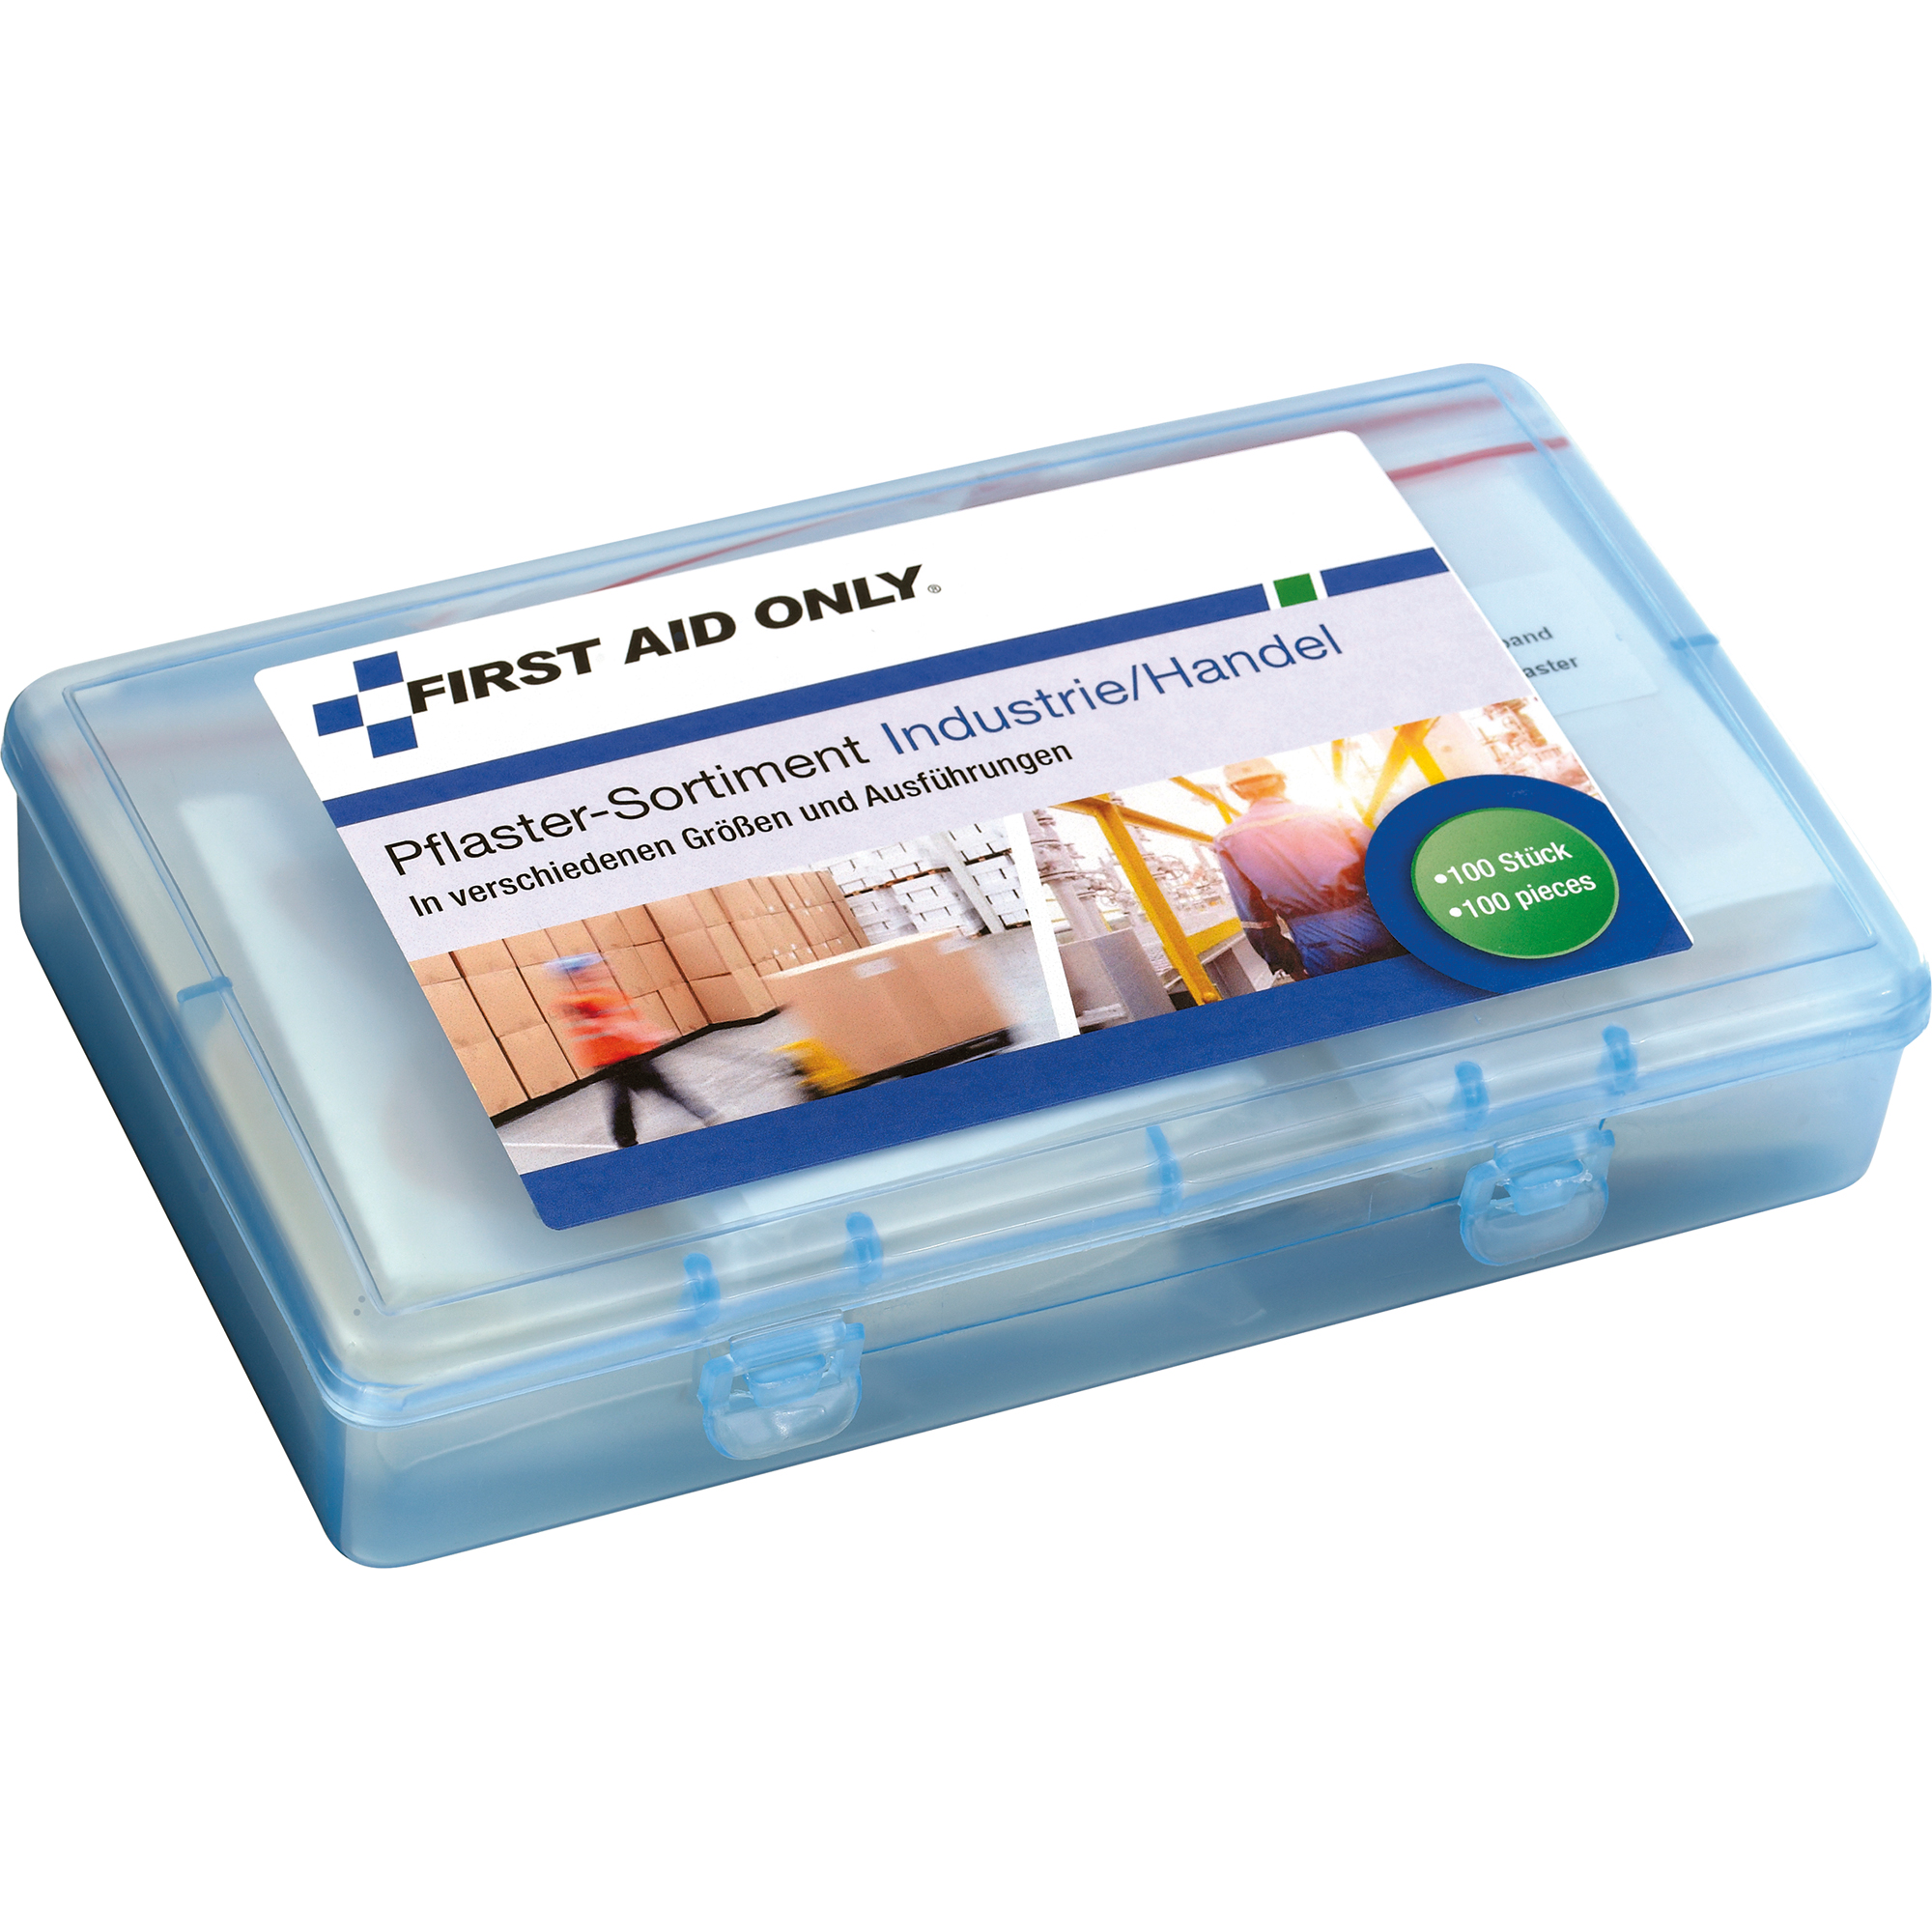 Westcott FIRST AID ONLY Pflaster P-10023 Industrie